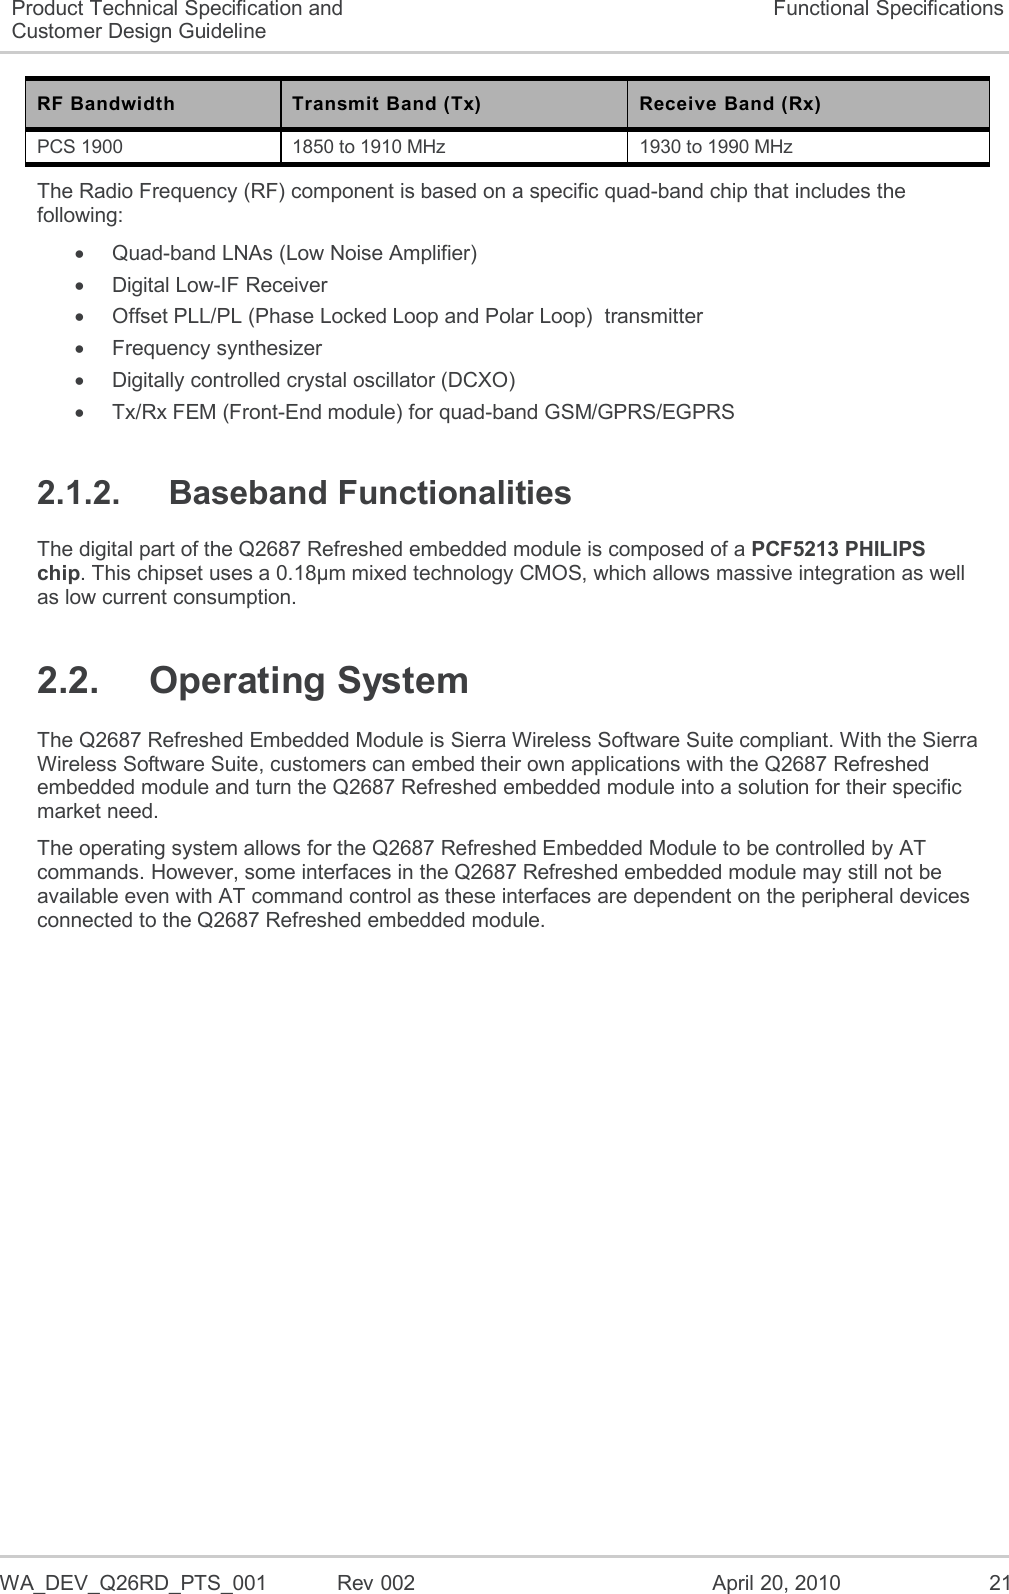  WA_DEV_Q26RD_PTS_001  Rev 002  April 20, 2010 21 Product Technical Specification and Customer Design Guideline Functional Specifications RF Bandwidth Transmit Band (Tx) Receive Band (Rx) PCS 1900 1850 to 1910 MHz 1930 to 1990 MHz The Radio Frequency (RF) component is based on a specific quad-band chip that includes the following:   Quad-band LNAs (Low Noise Amplifier)   Digital Low-IF Receiver   Offset PLL/PL (Phase Locked Loop and Polar Loop)  transmitter   Frequency synthesizer   Digitally controlled crystal oscillator (DCXO)   Tx/Rx FEM (Front-End module) for quad-band GSM/GPRS/EGPRS 2.1.2.  Baseband Functionalities The digital part of the Q2687 Refreshed embedded module is composed of a PCF5213 PHILIPS chip. This chipset uses a 0.18µm mixed technology CMOS, which allows massive integration as well as low current consumption. 2.2.  Operating System The Q2687 Refreshed Embedded Module is Sierra Wireless Software Suite compliant. With the Sierra Wireless Software Suite, customers can embed their own applications with the Q2687 Refreshed embedded module and turn the Q2687 Refreshed embedded module into a solution for their specific market need. The operating system allows for the Q2687 Refreshed Embedded Module to be controlled by AT commands. However, some interfaces in the Q2687 Refreshed embedded module may still not be available even with AT command control as these interfaces are dependent on the peripheral devices connected to the Q2687 Refreshed embedded module. 